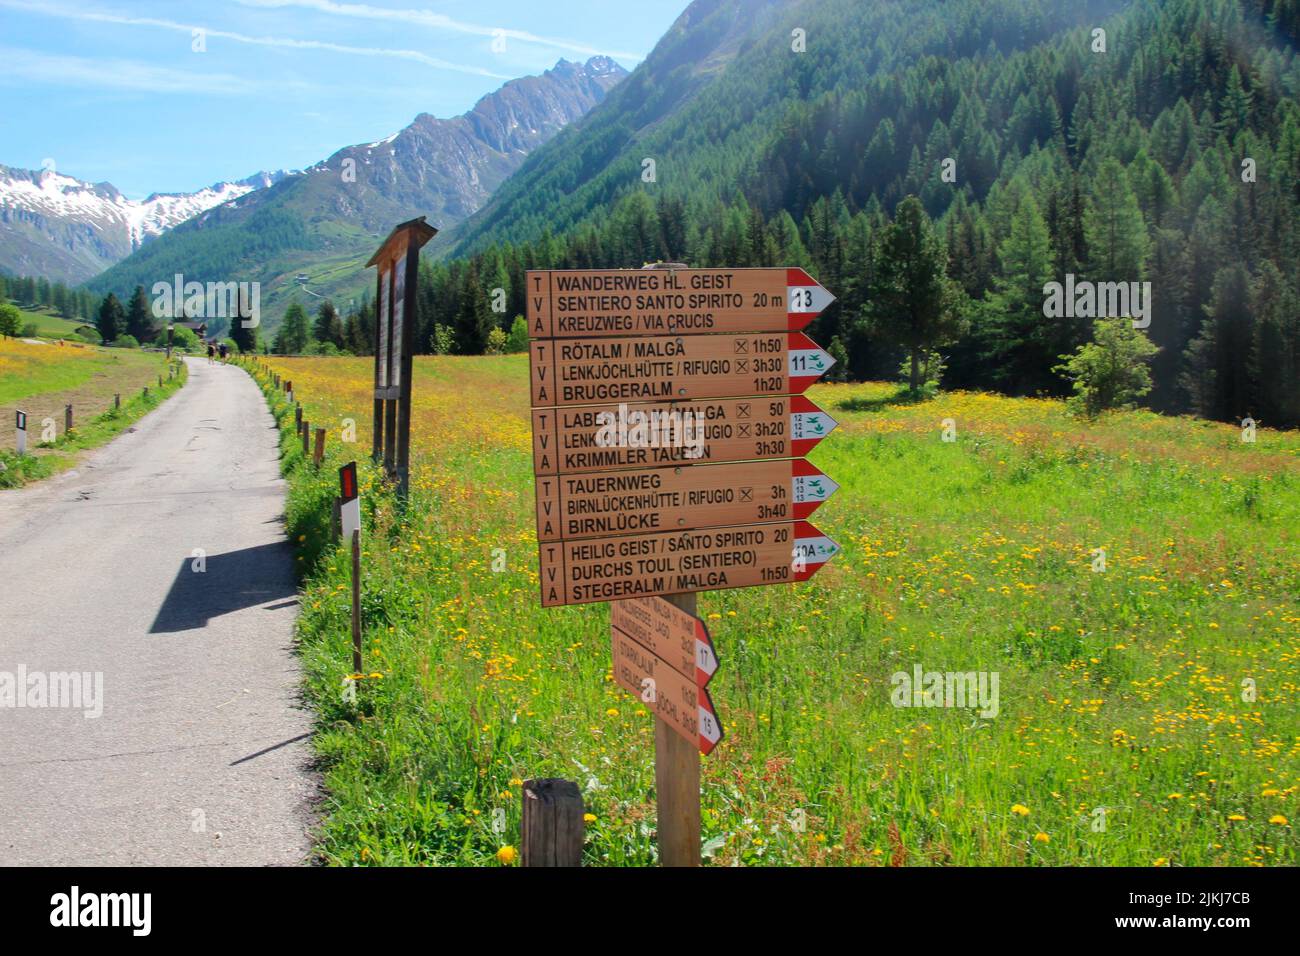 Road from Kasern to Prettau, hiking trails, signposts, Ahrntal, Province of Bolzano, South Tyrol, Italy Stock Photo